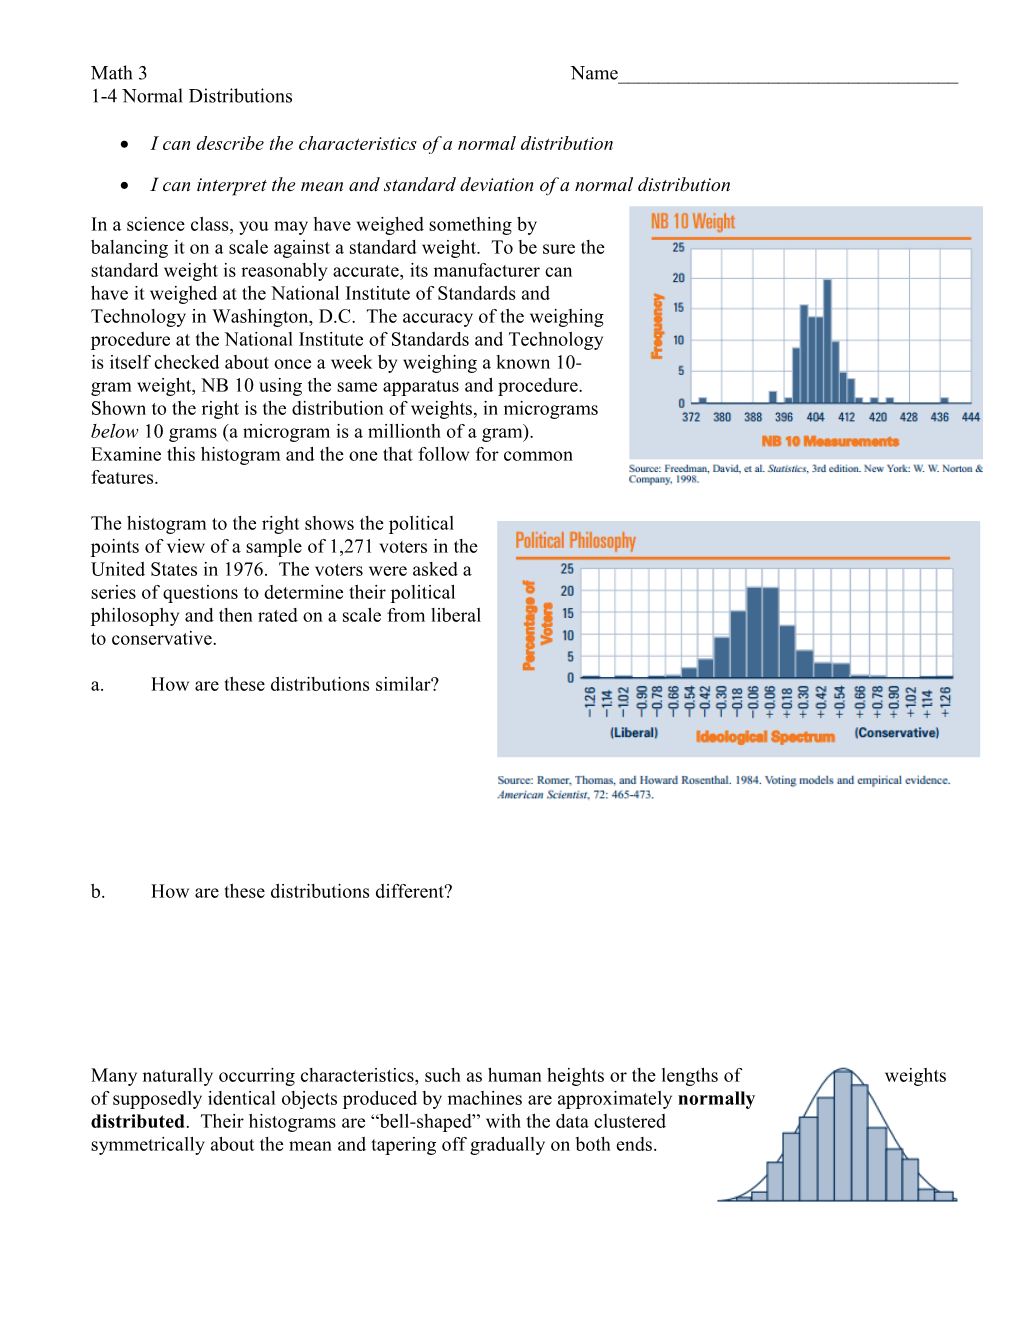 1-4 Normal Distributions